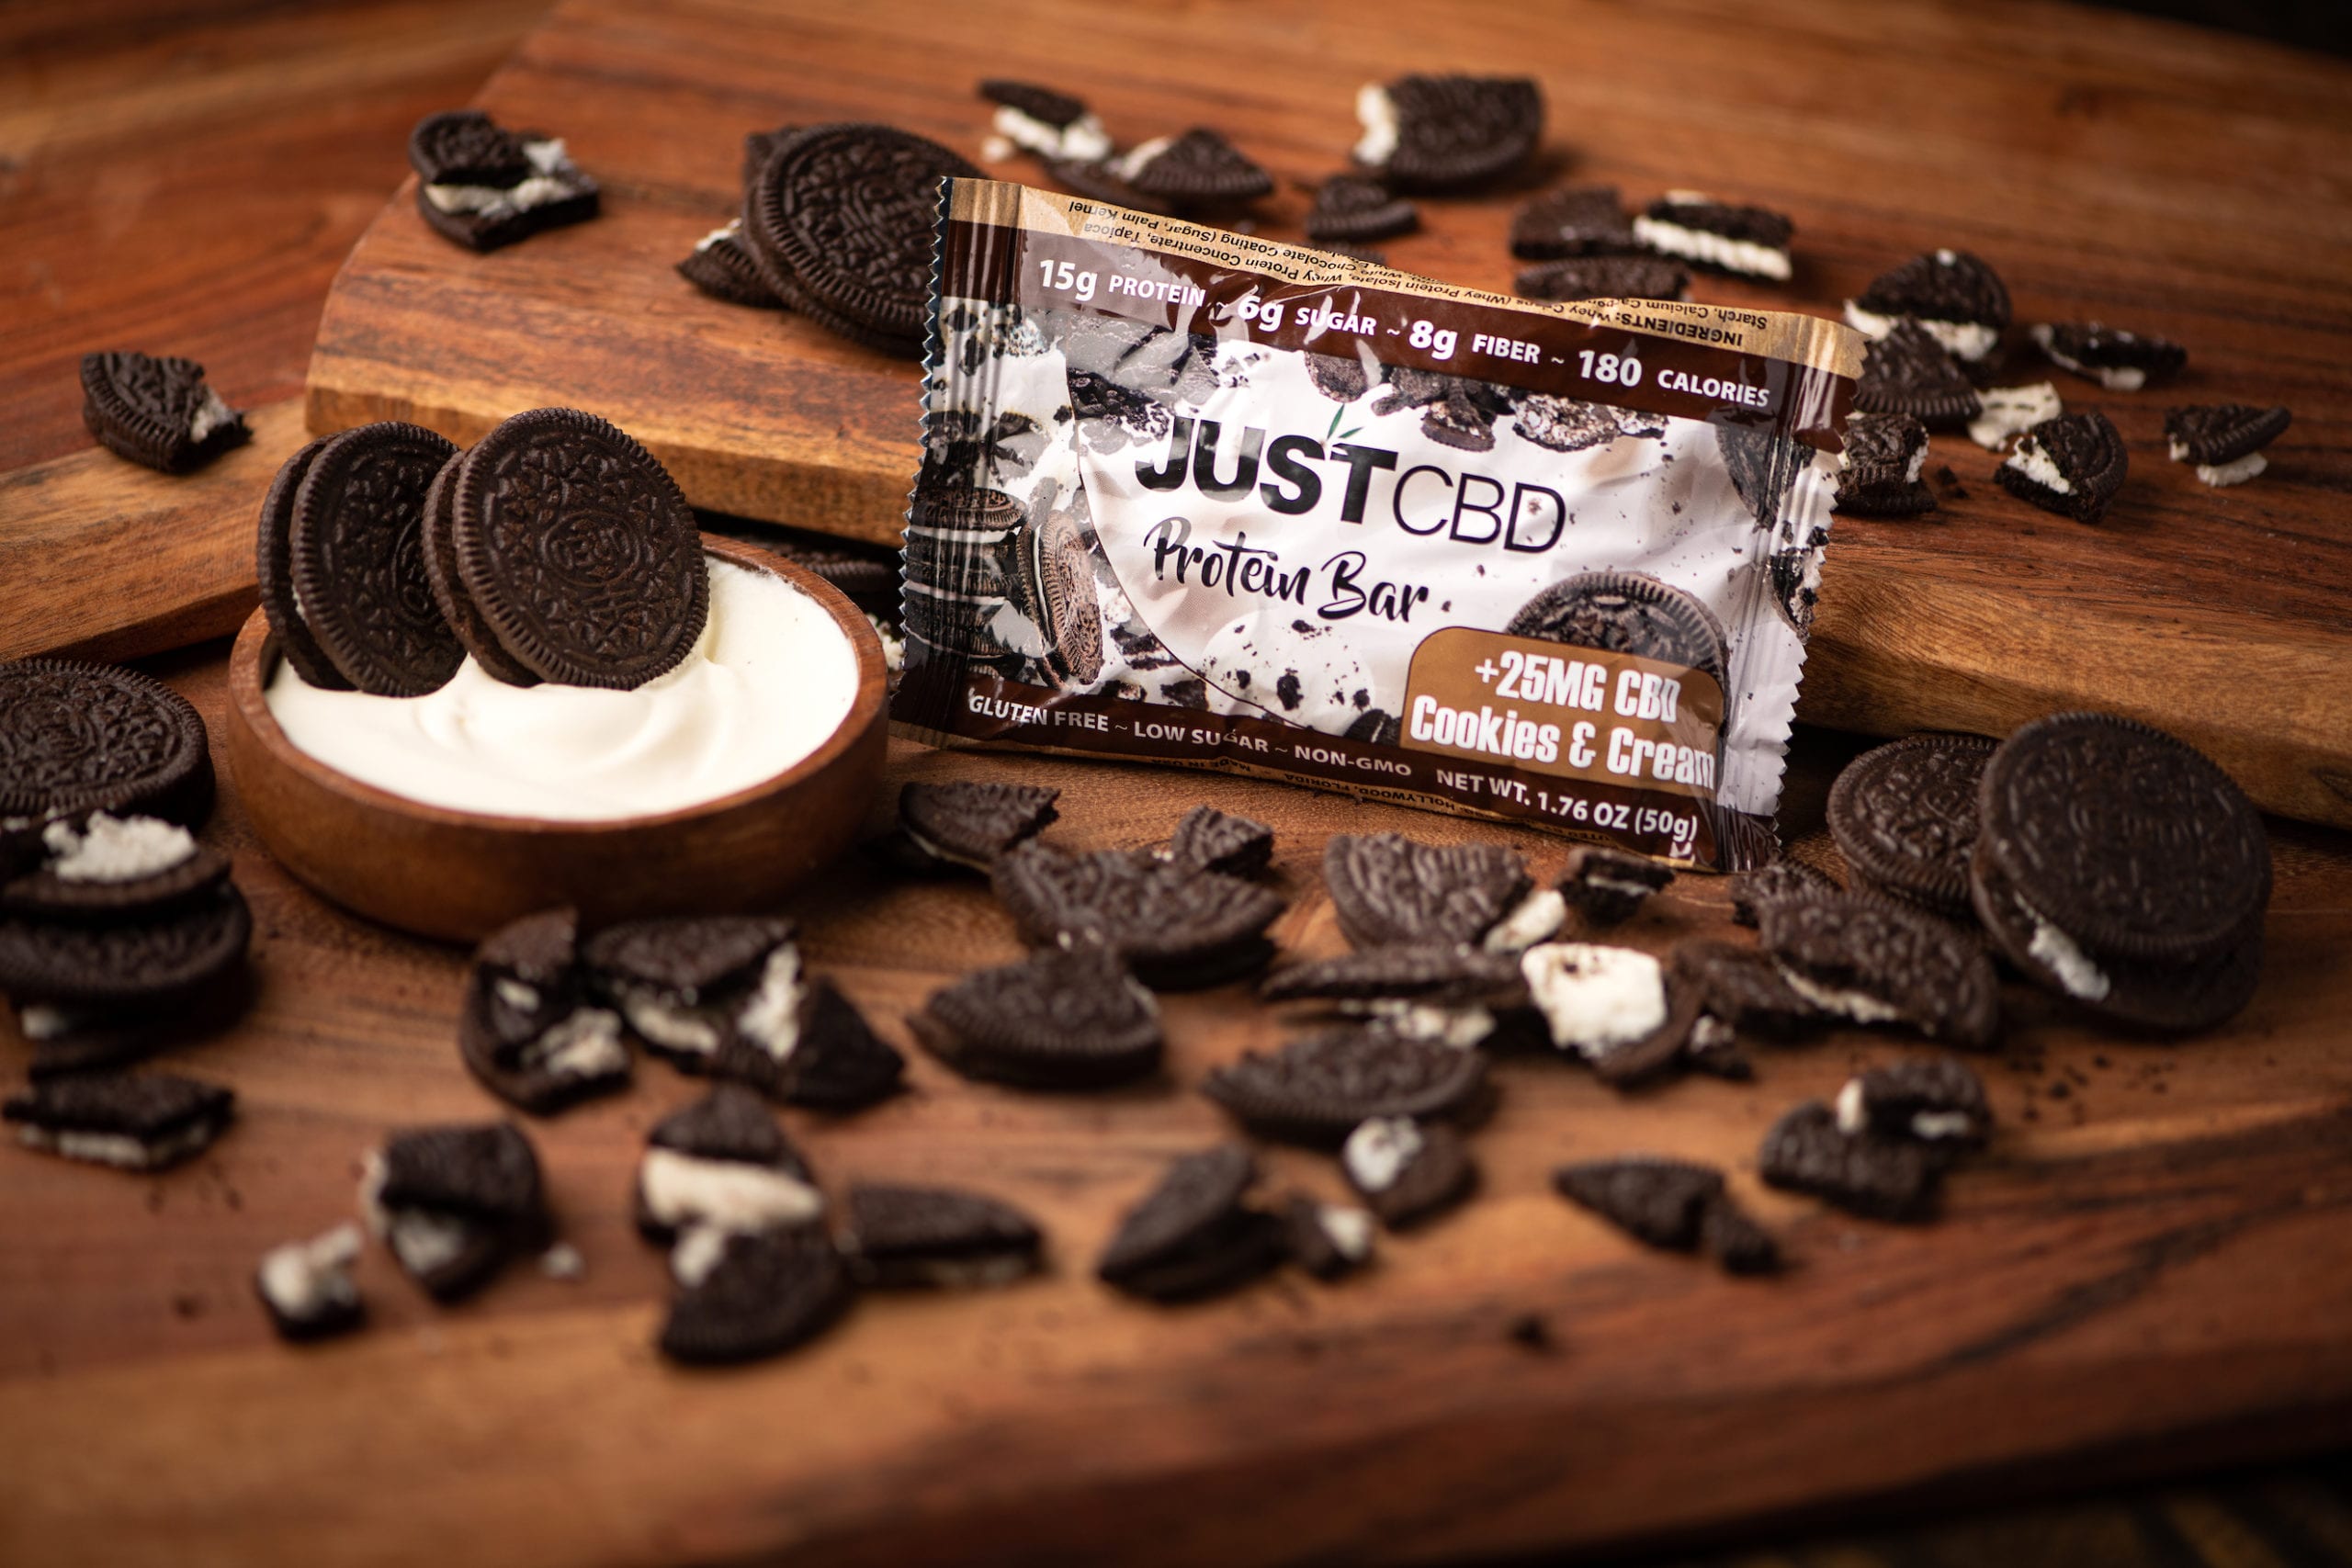 IU C&I Studios Portfolio JustCBD Product Photography and Just CBD Products JUSTCBD Cookies and cream protein bar package surrounded by cookies and bowl of cream on a wooden table